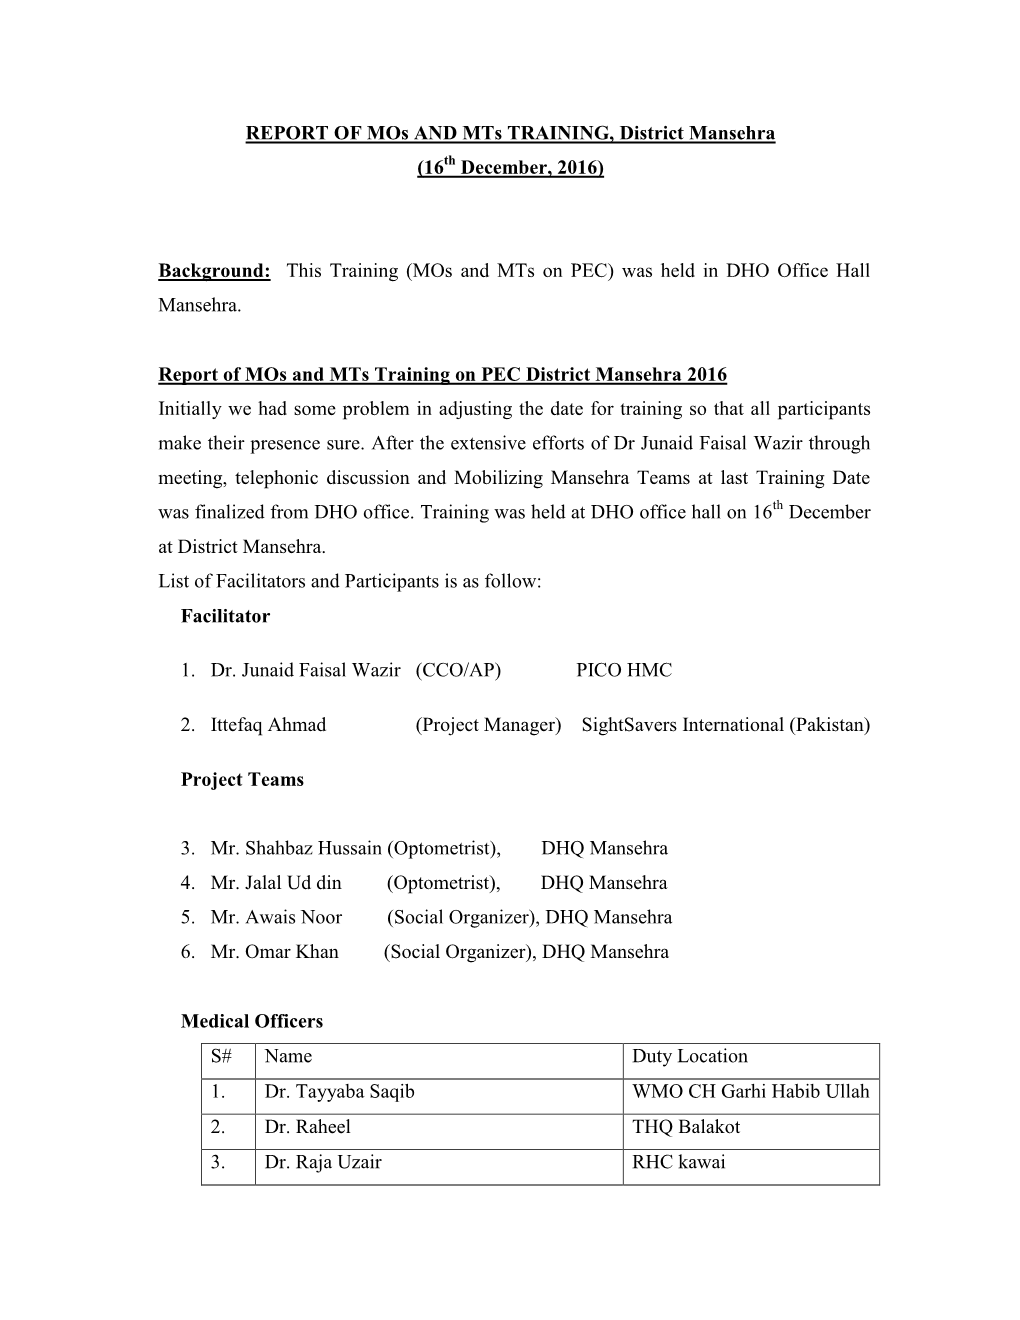 REPORT of Mos and Mts TRAINING, District Mansehra (16Th December, 2016)